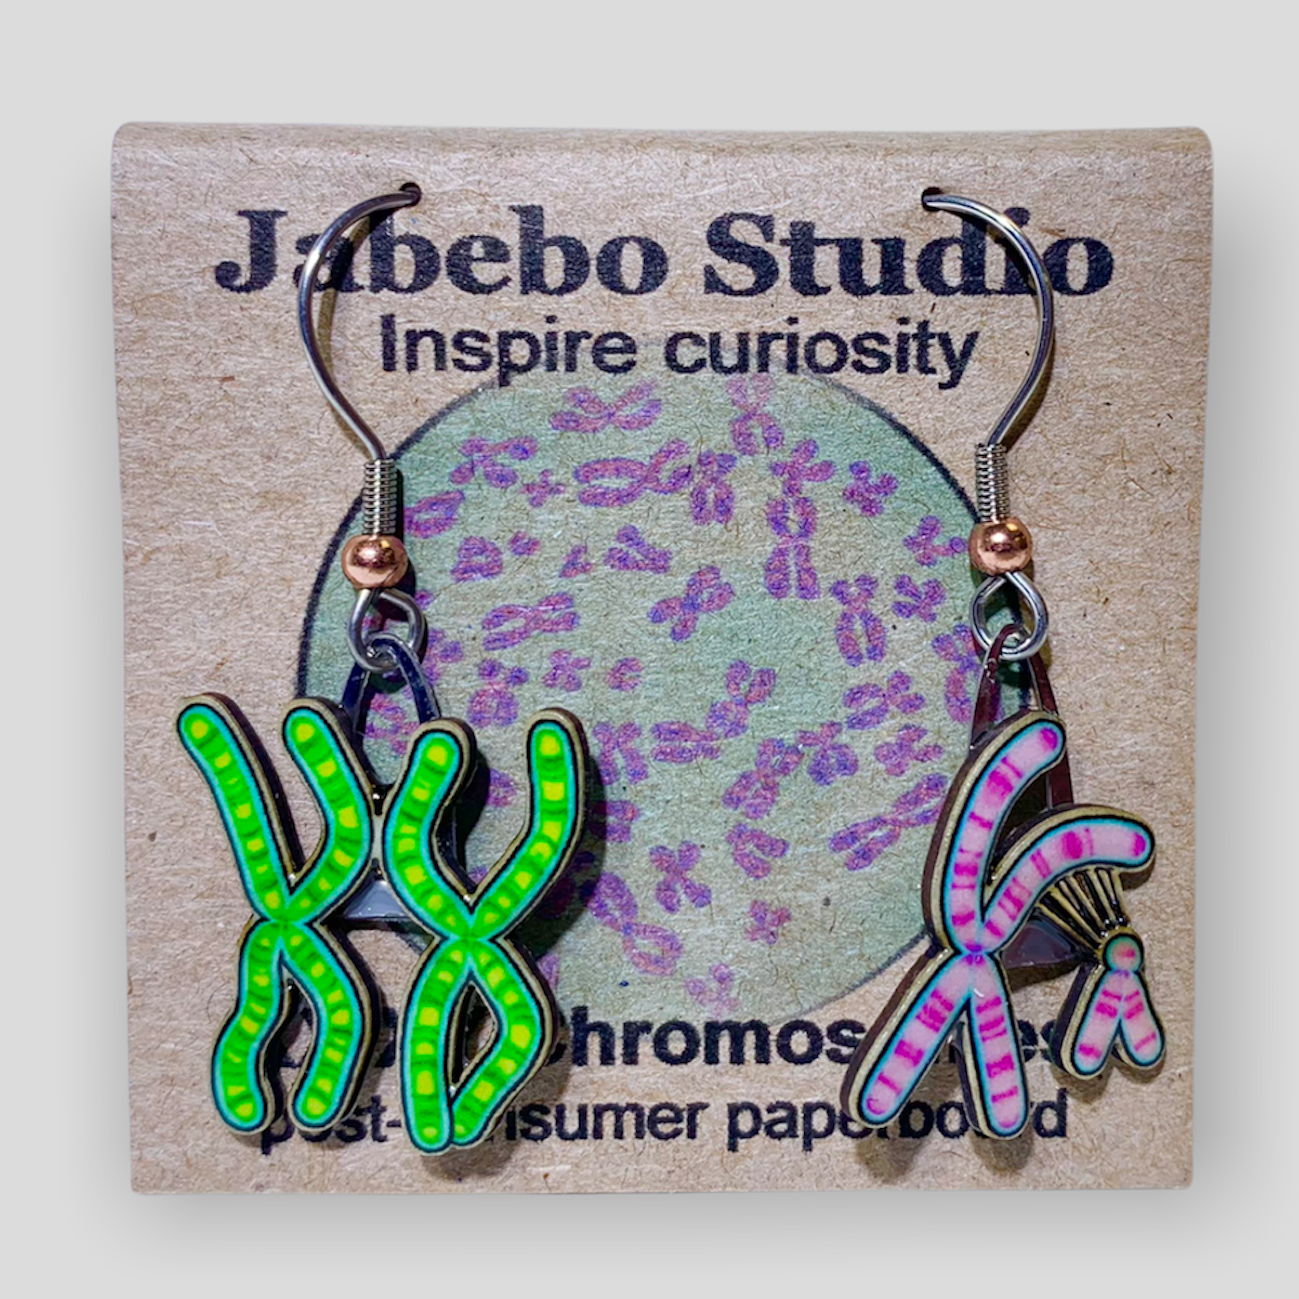 Picture shown is of 1 inch tall pair of earrings of XX and XY Chromosomes.